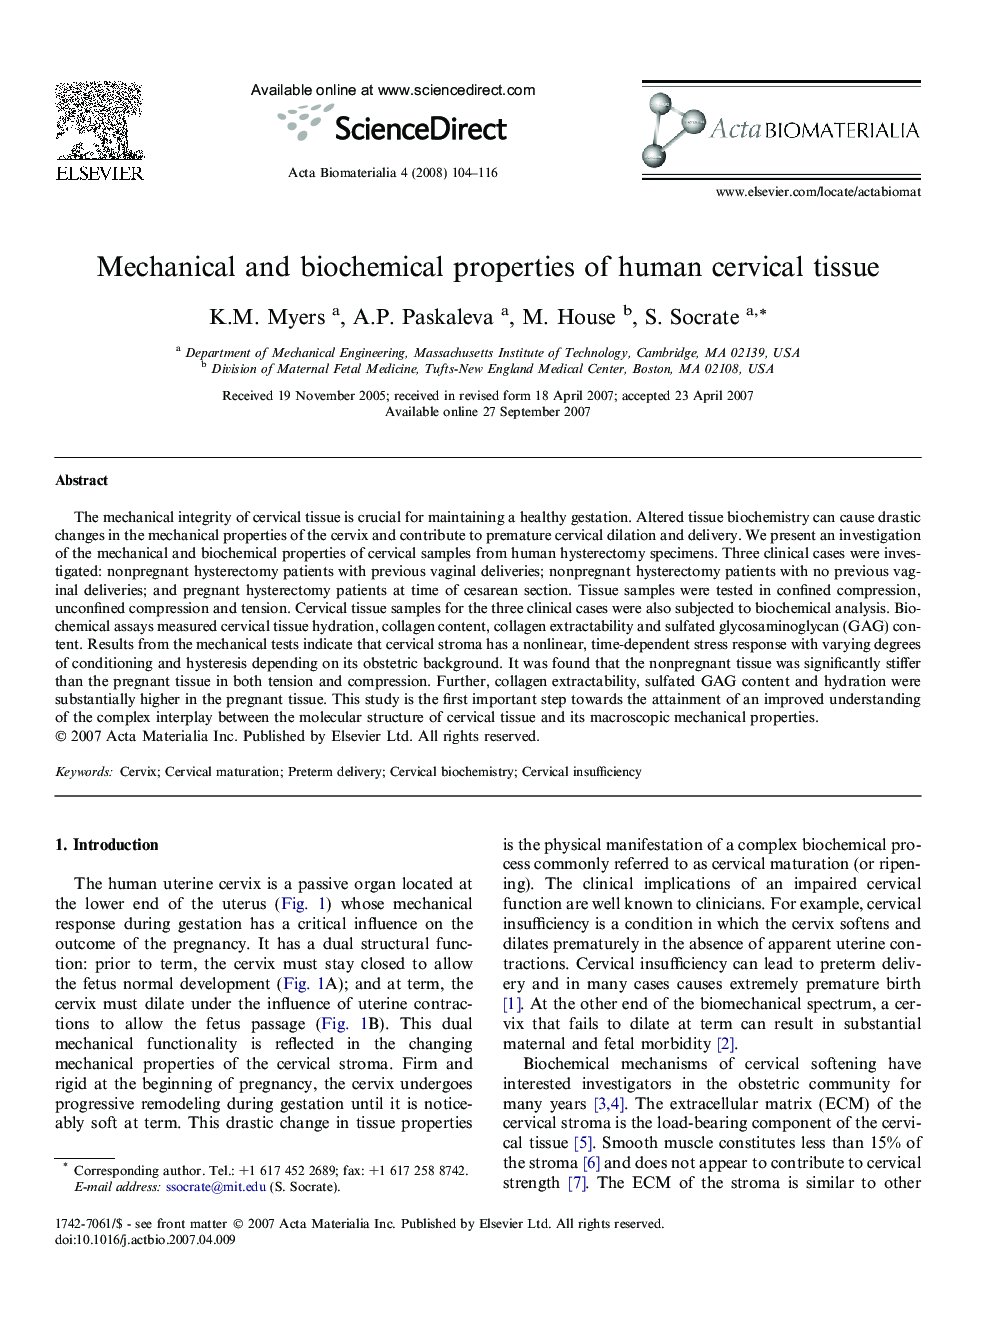 Mechanical and biochemical properties of human cervical tissue